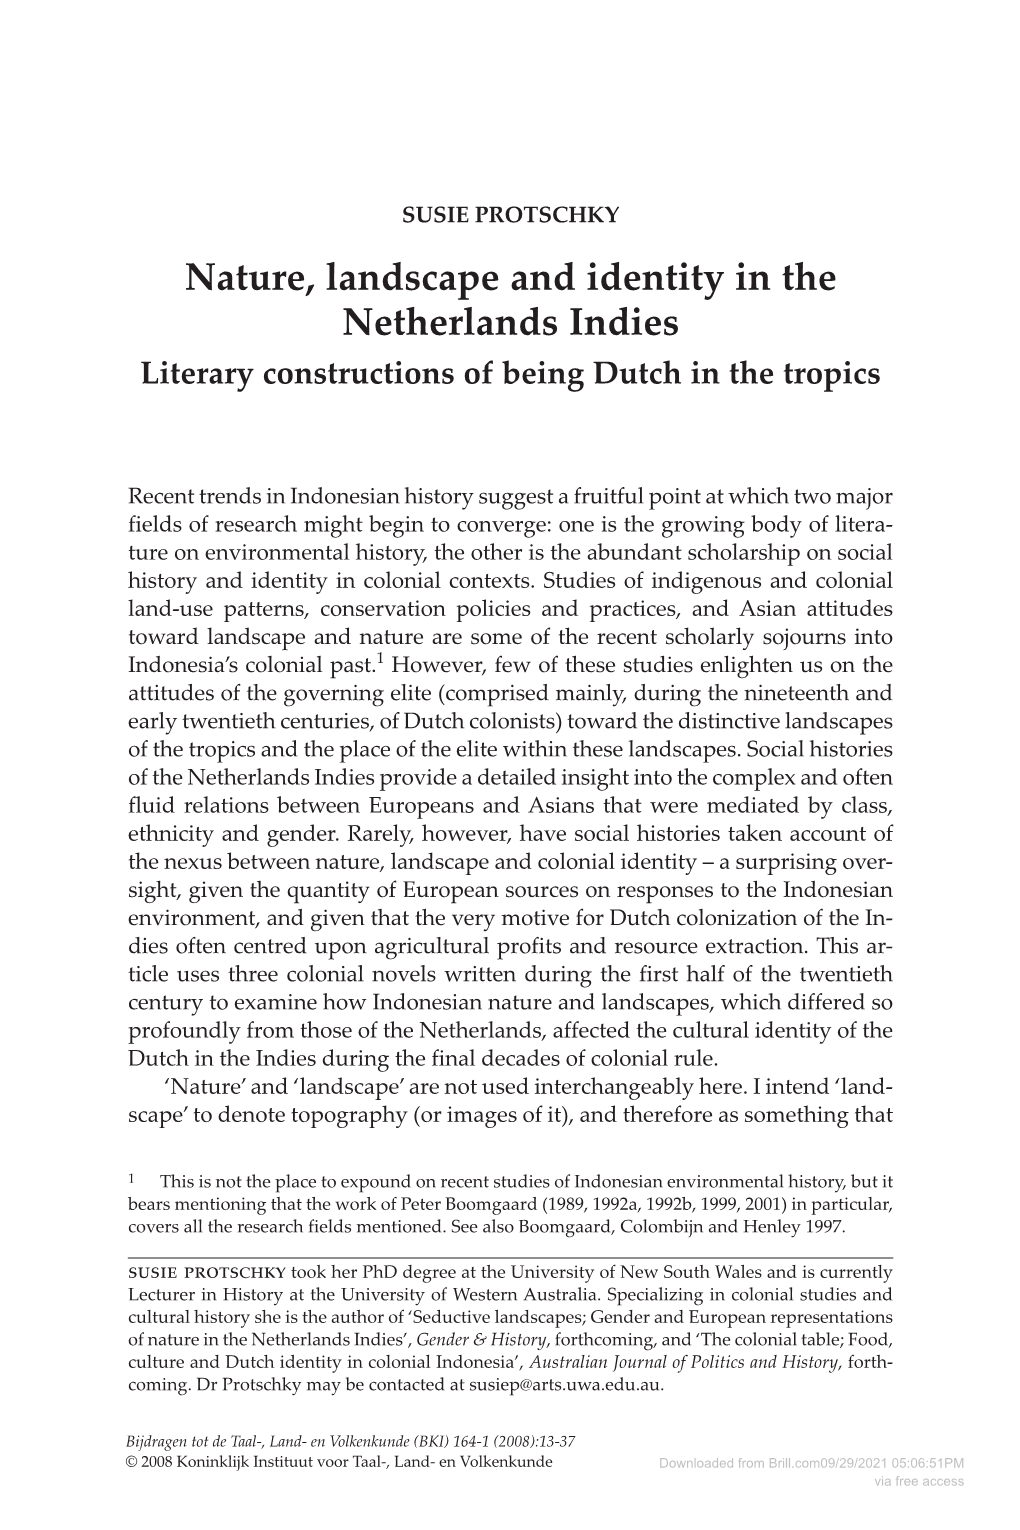 Nature, Landscape and Identity in the Netherlands Indies Literary Constructions of Being Dutch in the Tropics